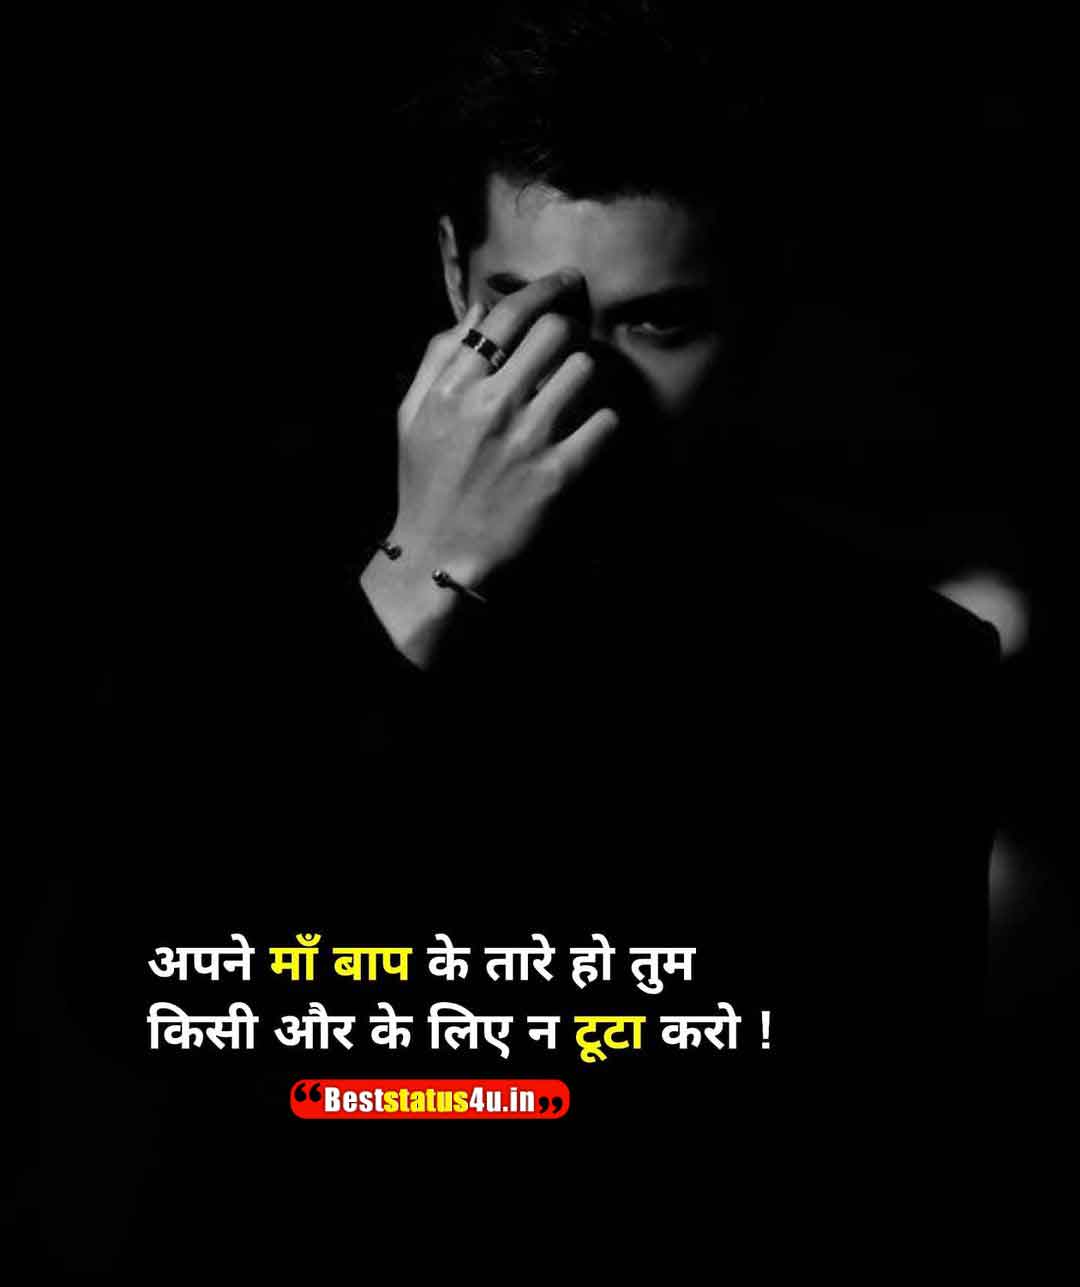 50+ Best Whatsapp Status in Hindi [New Quotes in Hindi] You Love It ...